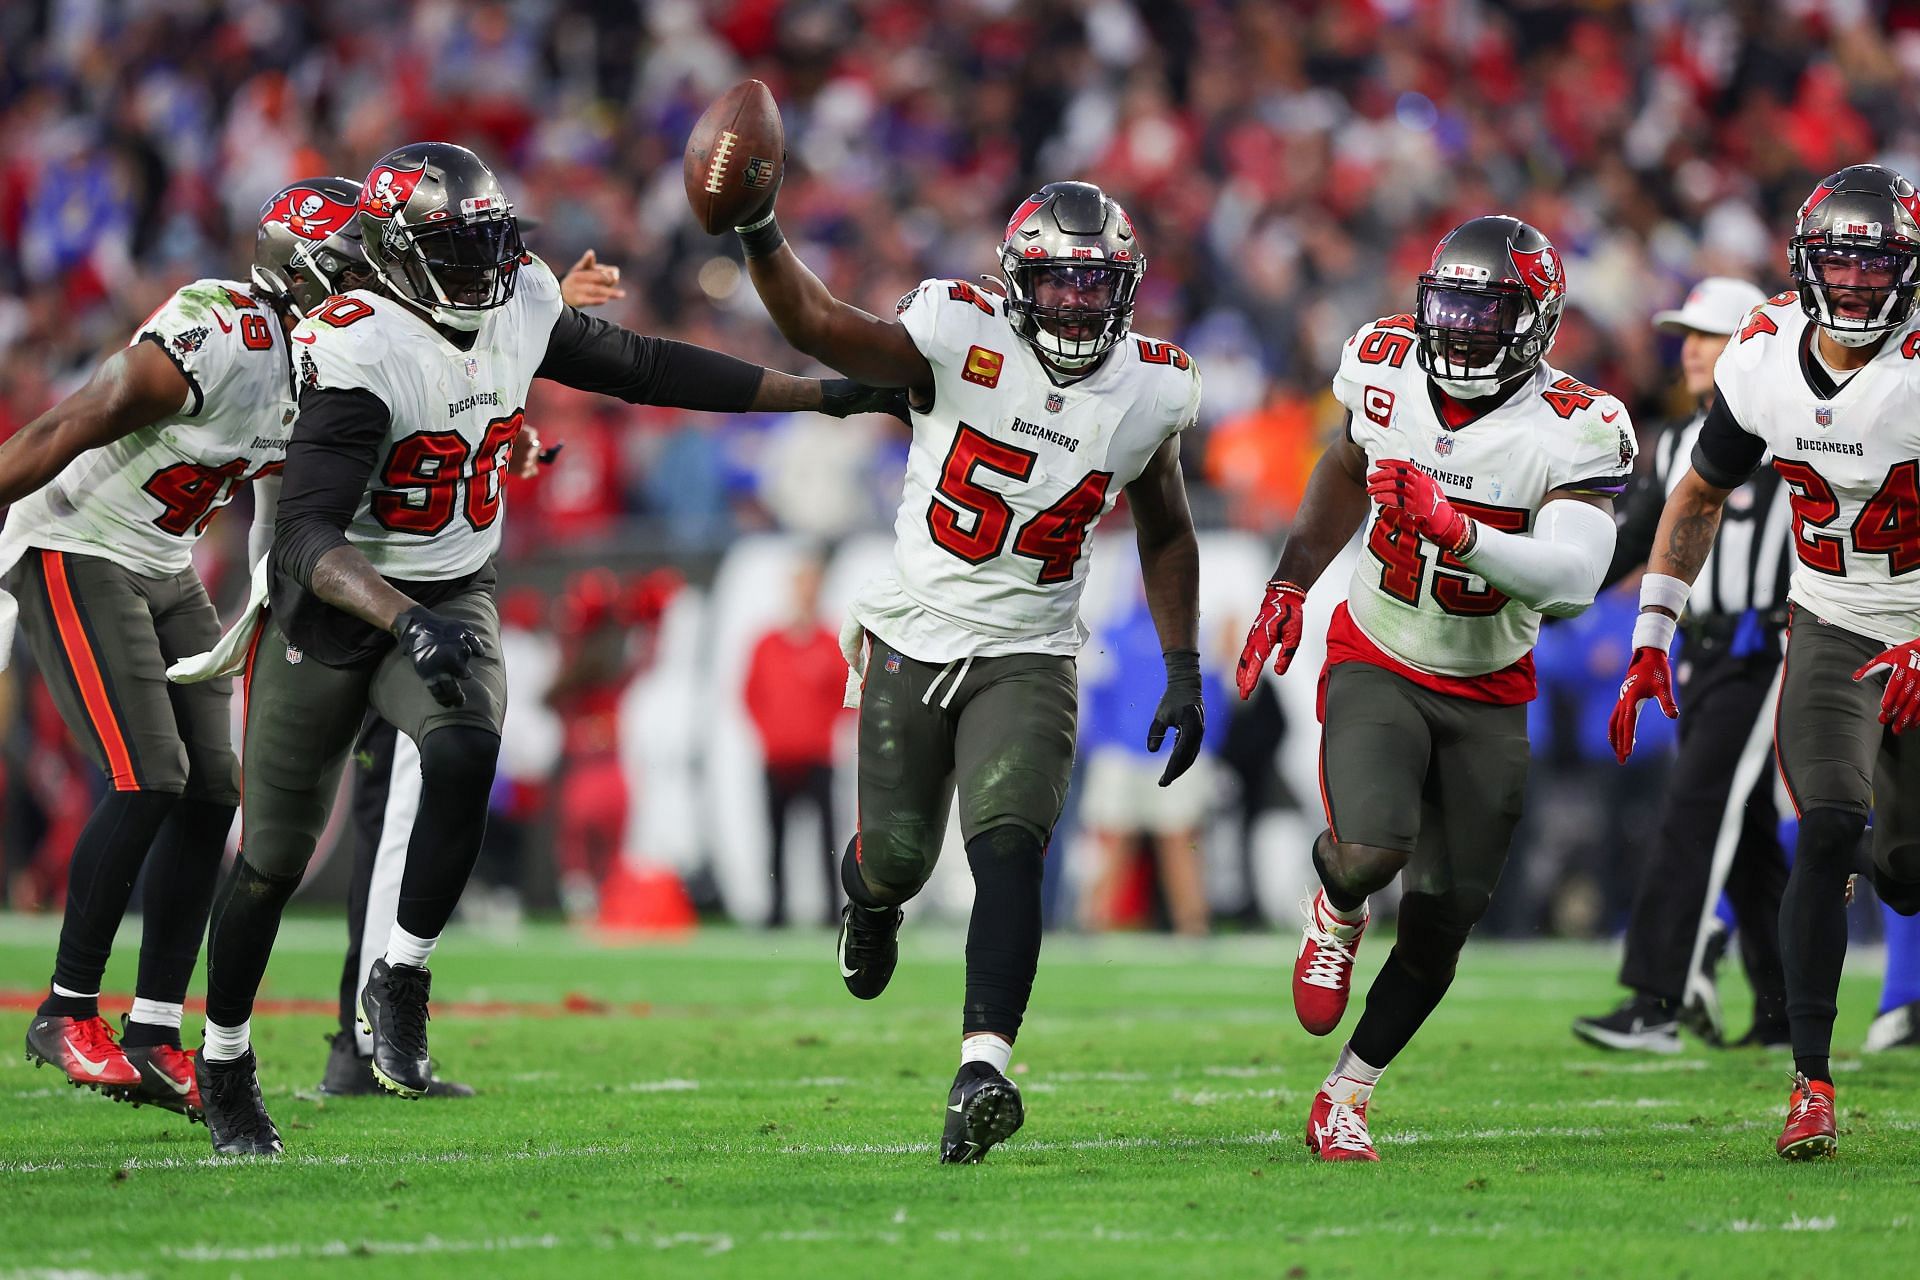 Tampa Bay Buccaneers Schedule 2022 Opponents and winloss predictions